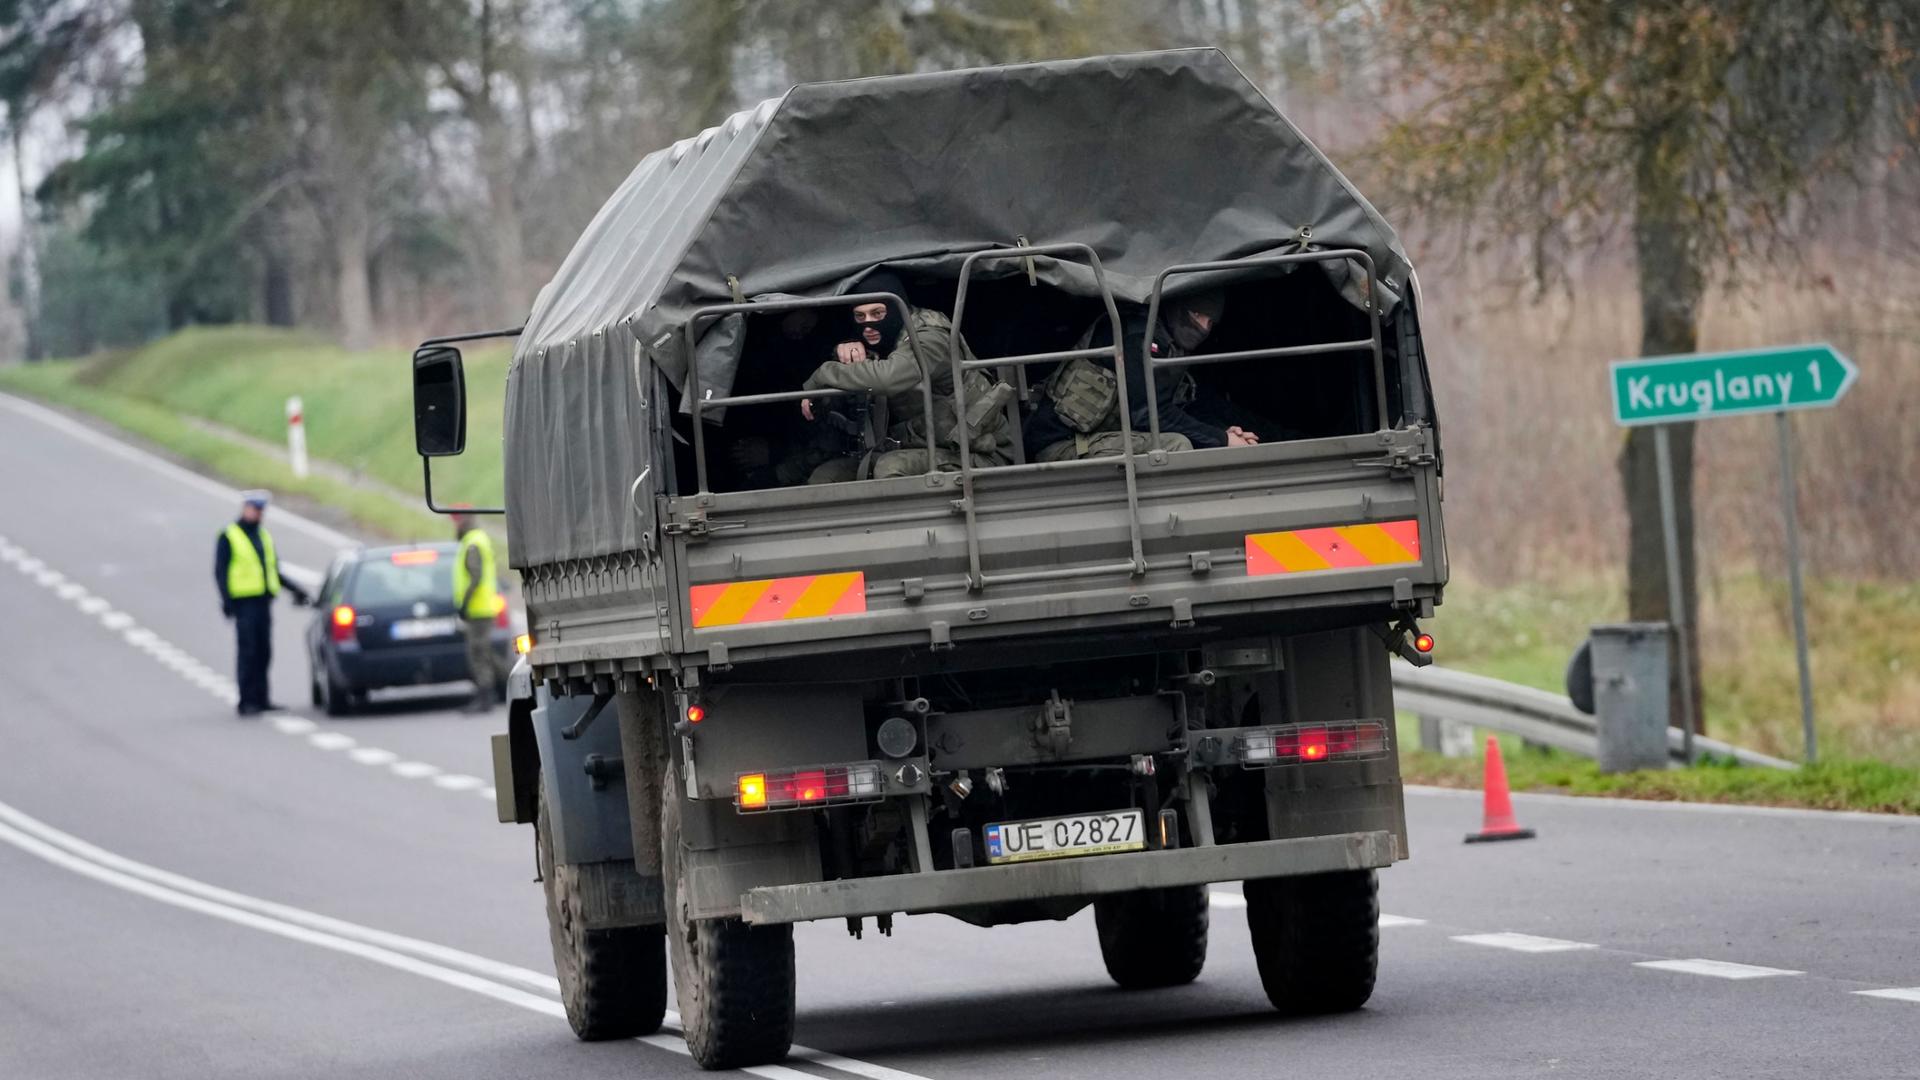 A polish army vehicle drives past a check point close to the border with Belarus in Kuznica, Poland, Tuesday, Nov. 16, 2021.